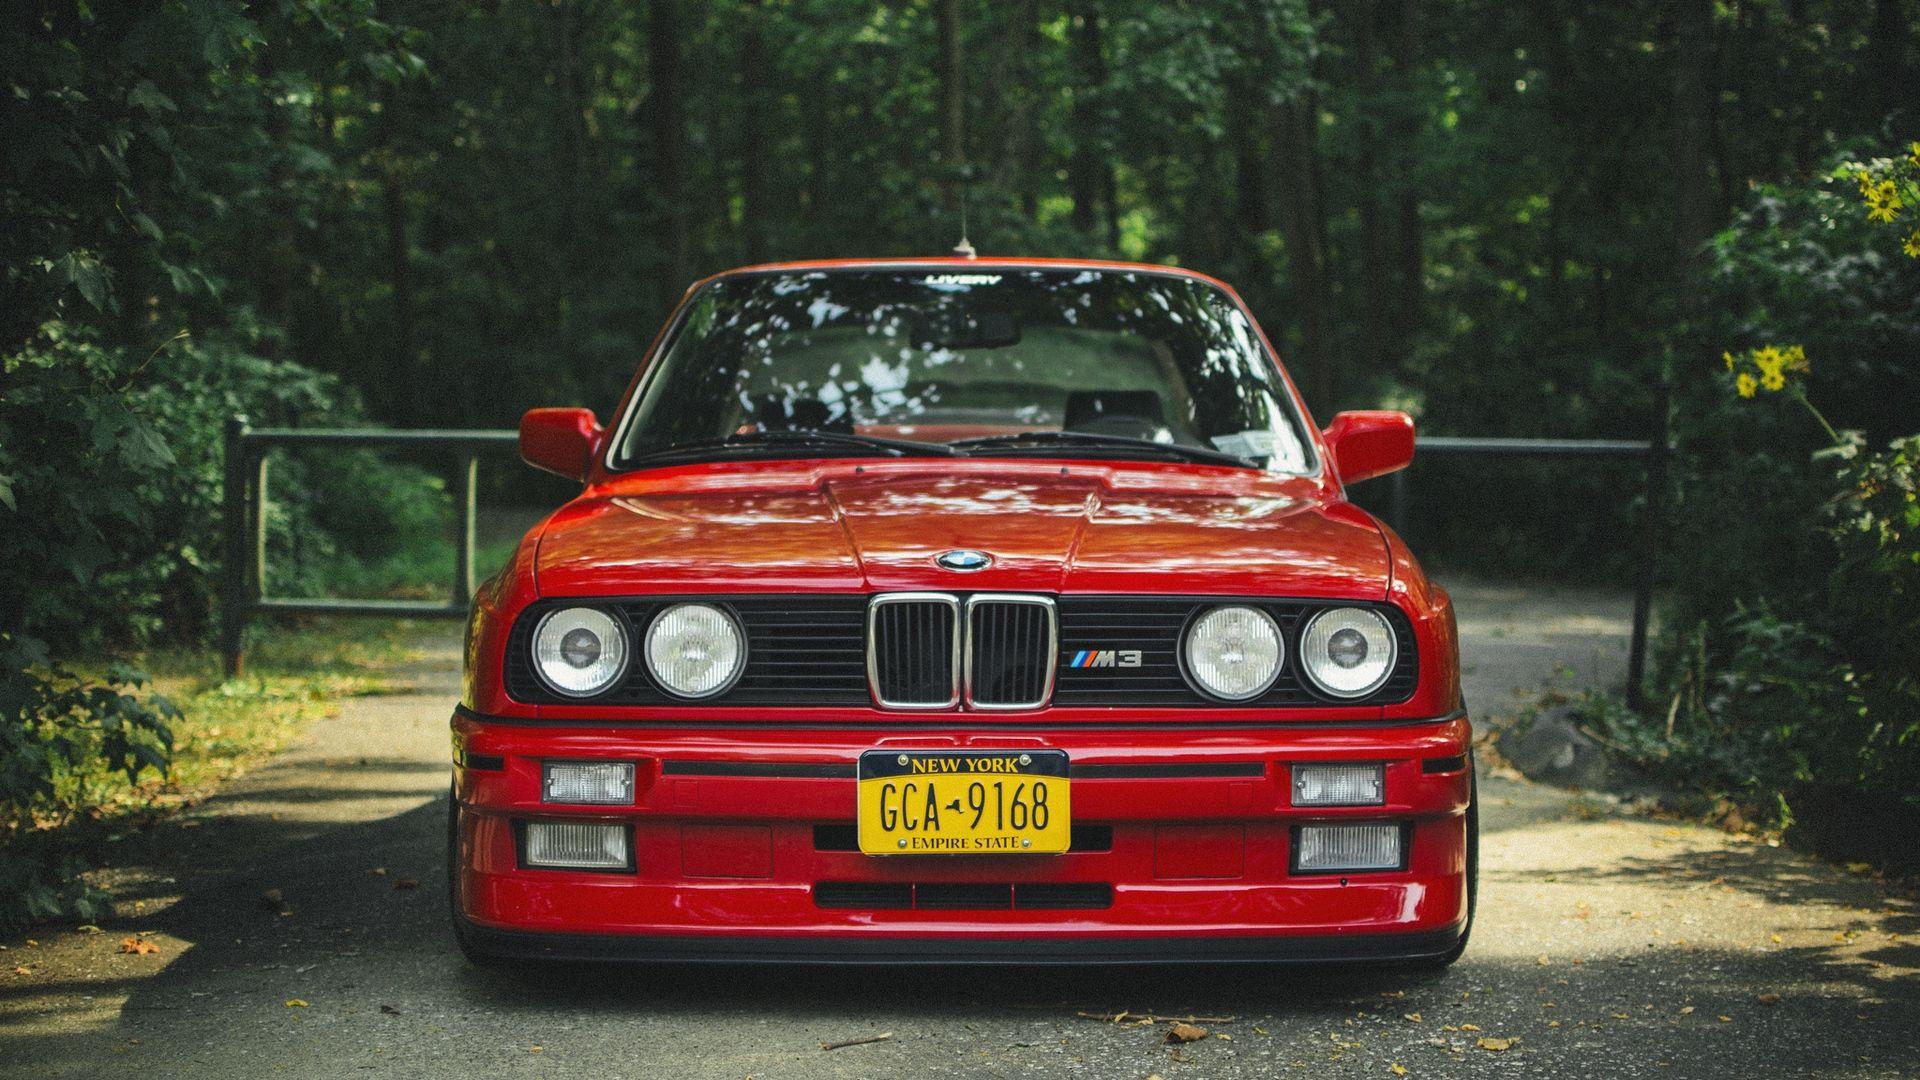 Download wallpaper 1920x1080 bmw, e m red, tuning full hd, hdtv